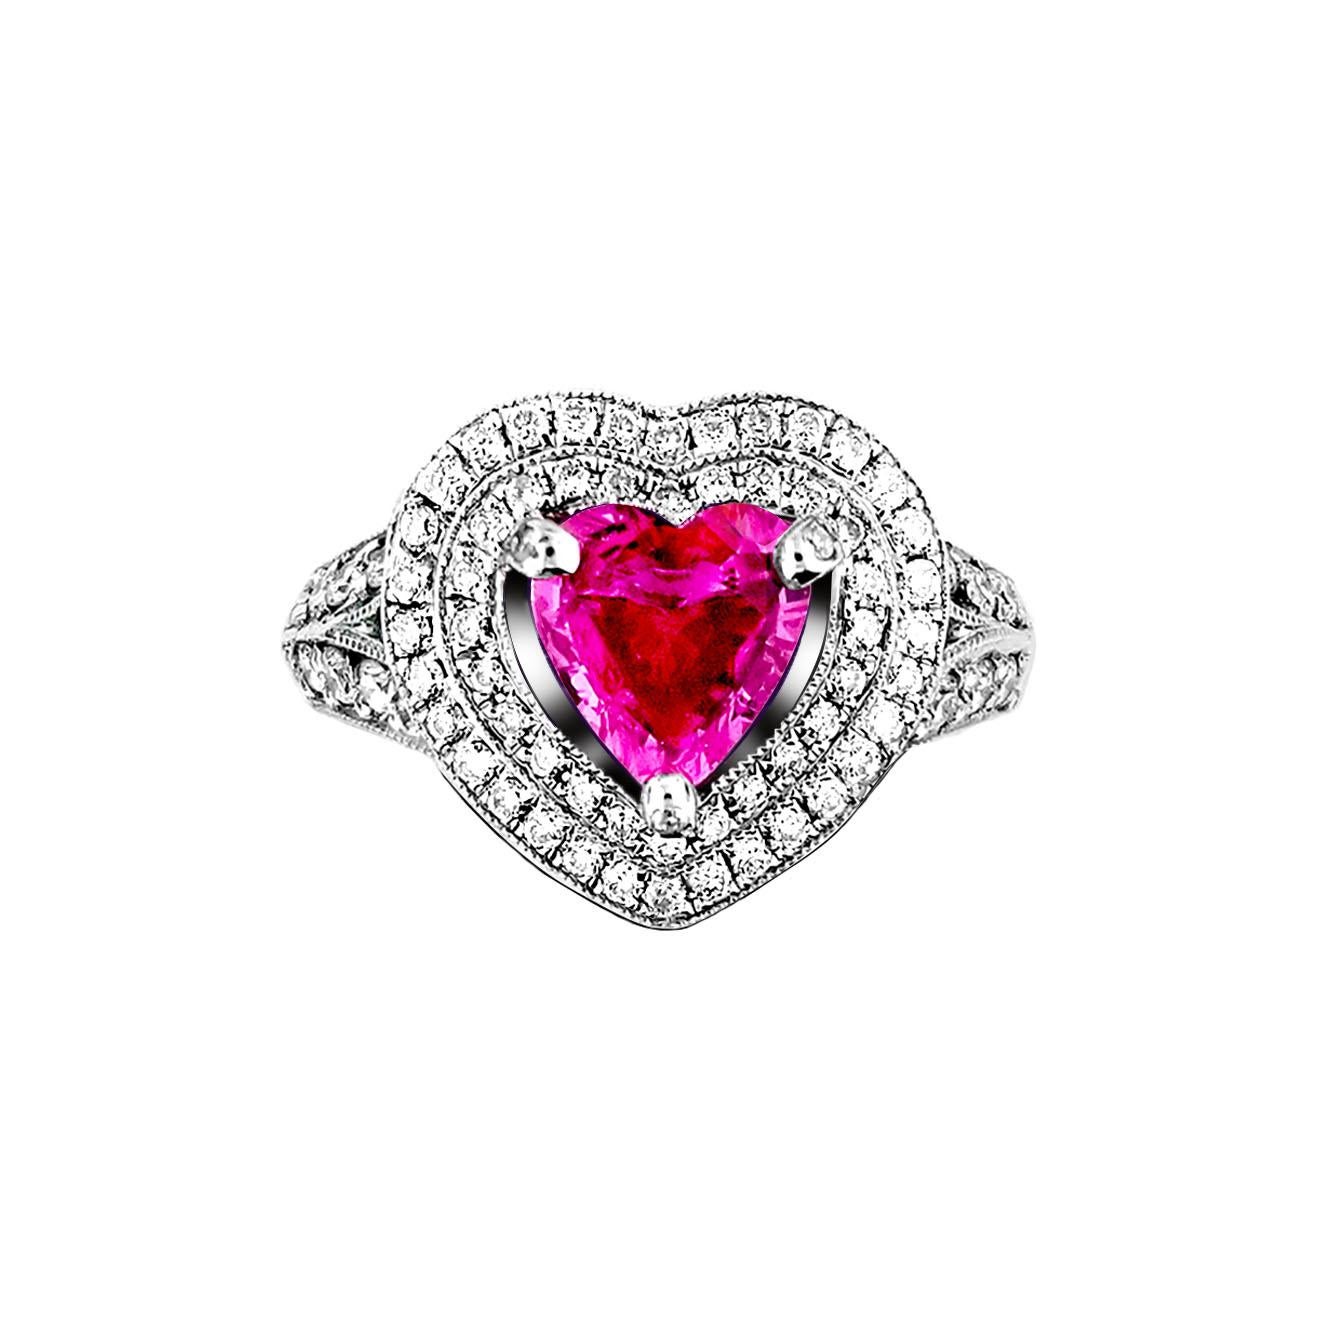 Produced by award winning Italian designer Stefano Vitolo. Stefano creates custom artisanal one of a kind jewelry with excellent gemstones in a truly old world Italian craftmanship.

Gemstone: Pink Sapphire 0.80 ctw, Diamonds 1.0 ctw
Ring width: 3 mm